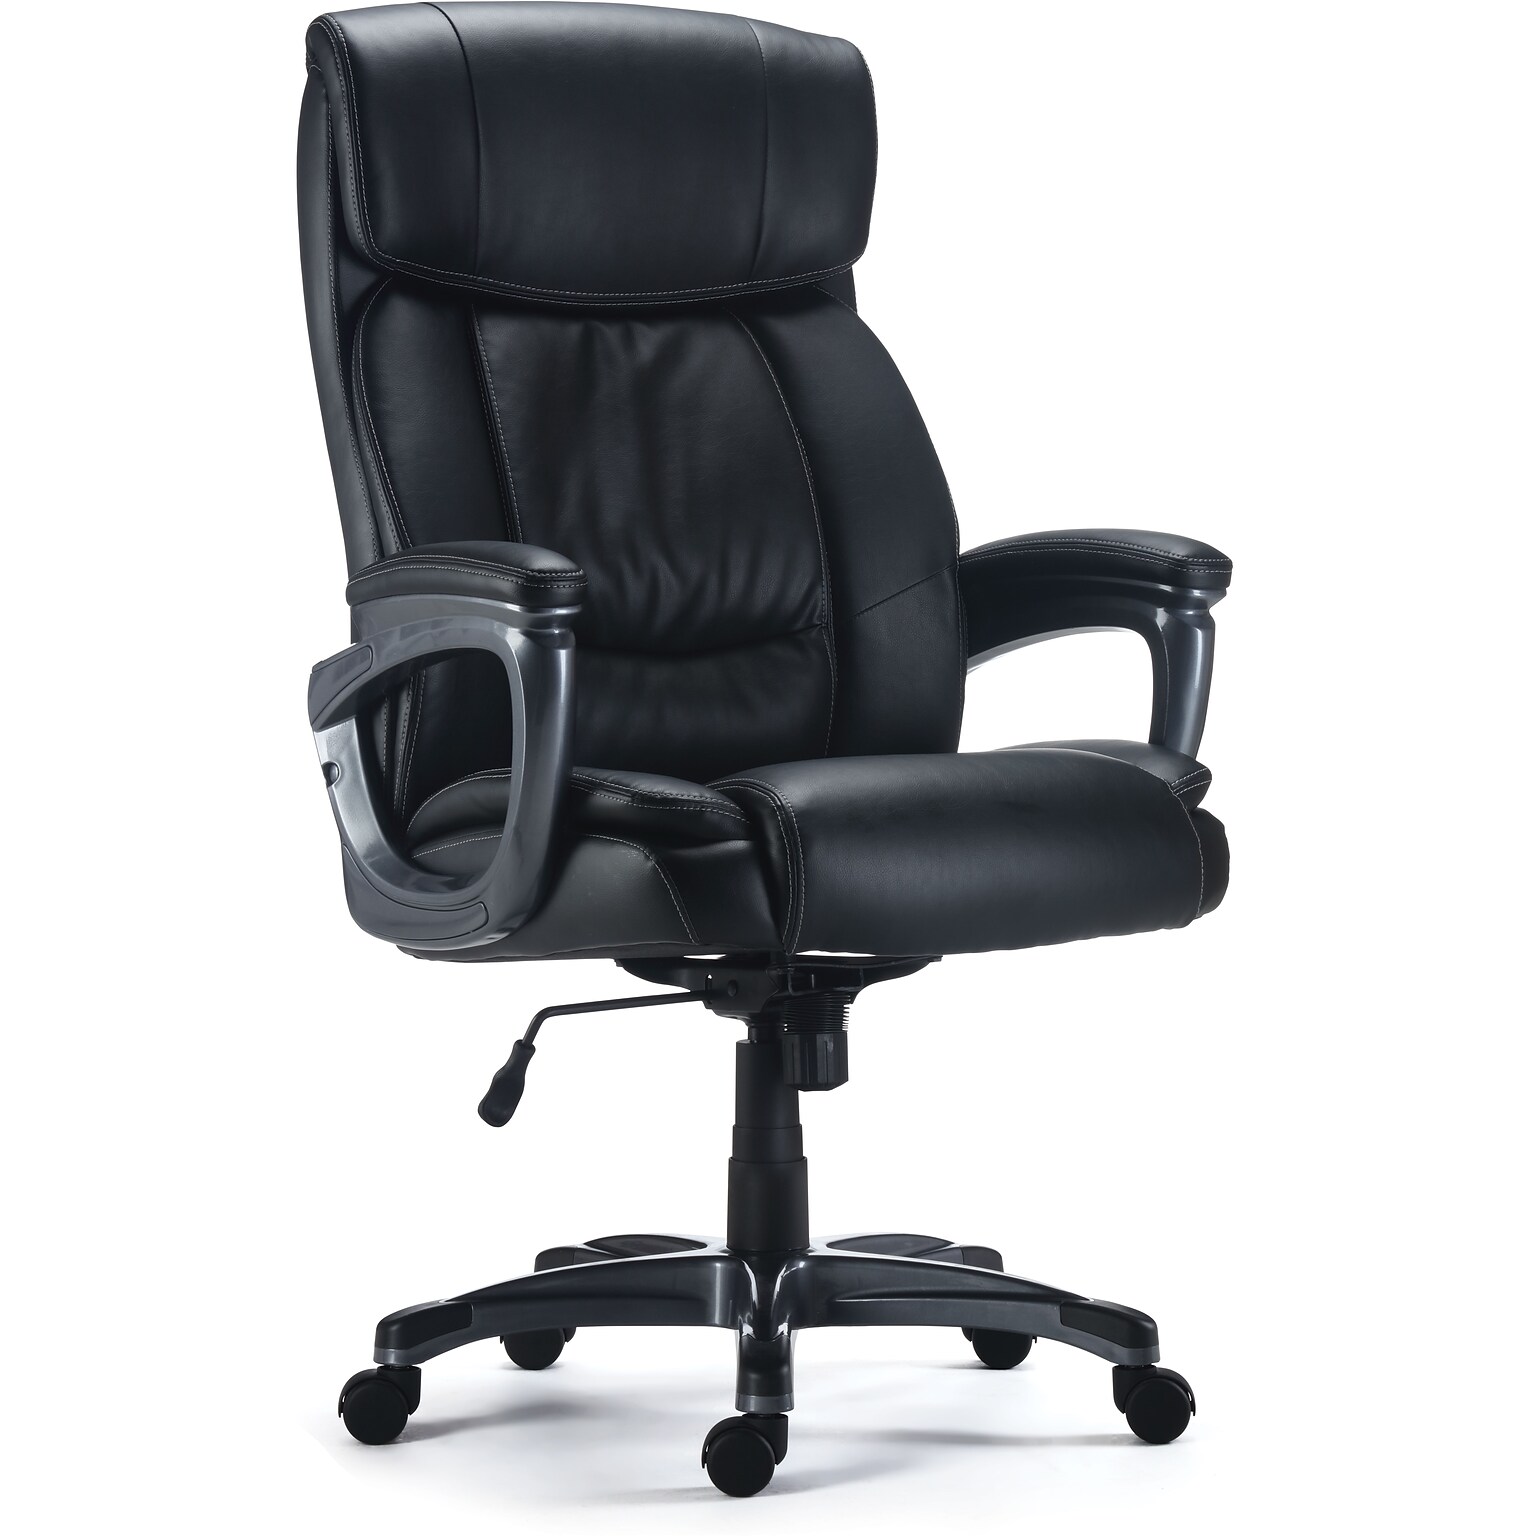 Quill Brand® Lockland Bonded Leather Big & Tall Managers Chair, Black (53235)